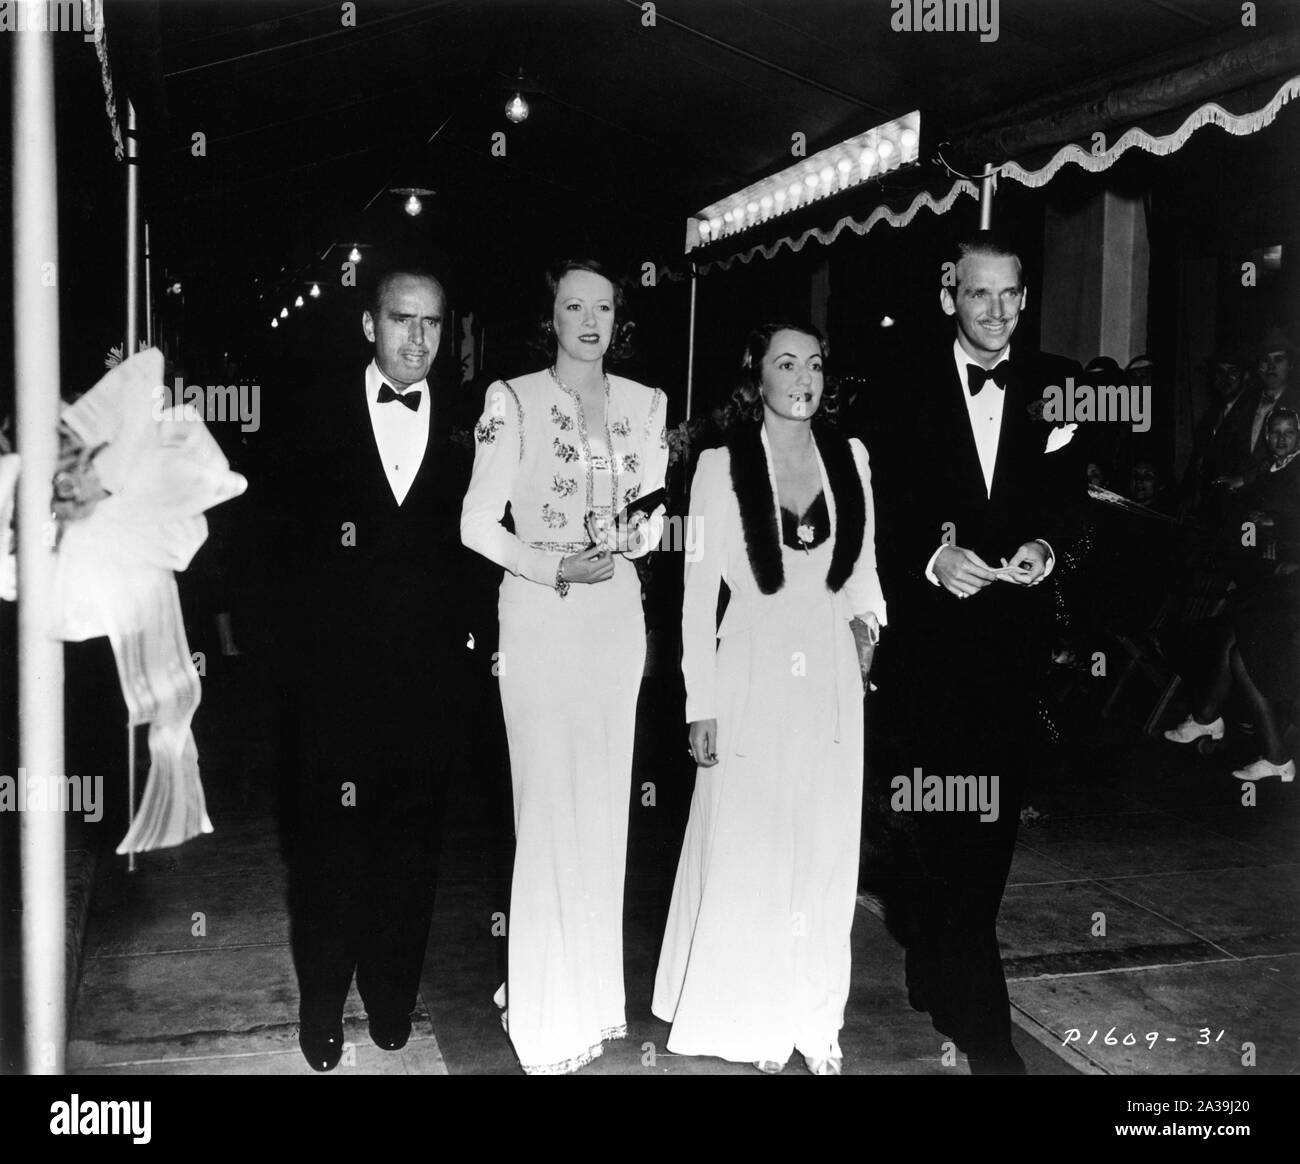 DOUGLAS FAIRBANKS Sr and his 3rd wife SYLVIA ASHLEY and DOUGLAS FAIRBANKS  Jr with his 2nd wife MARY LEE EPPLING at Hollywood Premiere of RULERS OF  THE SEA 1939 director Frank Lloyd